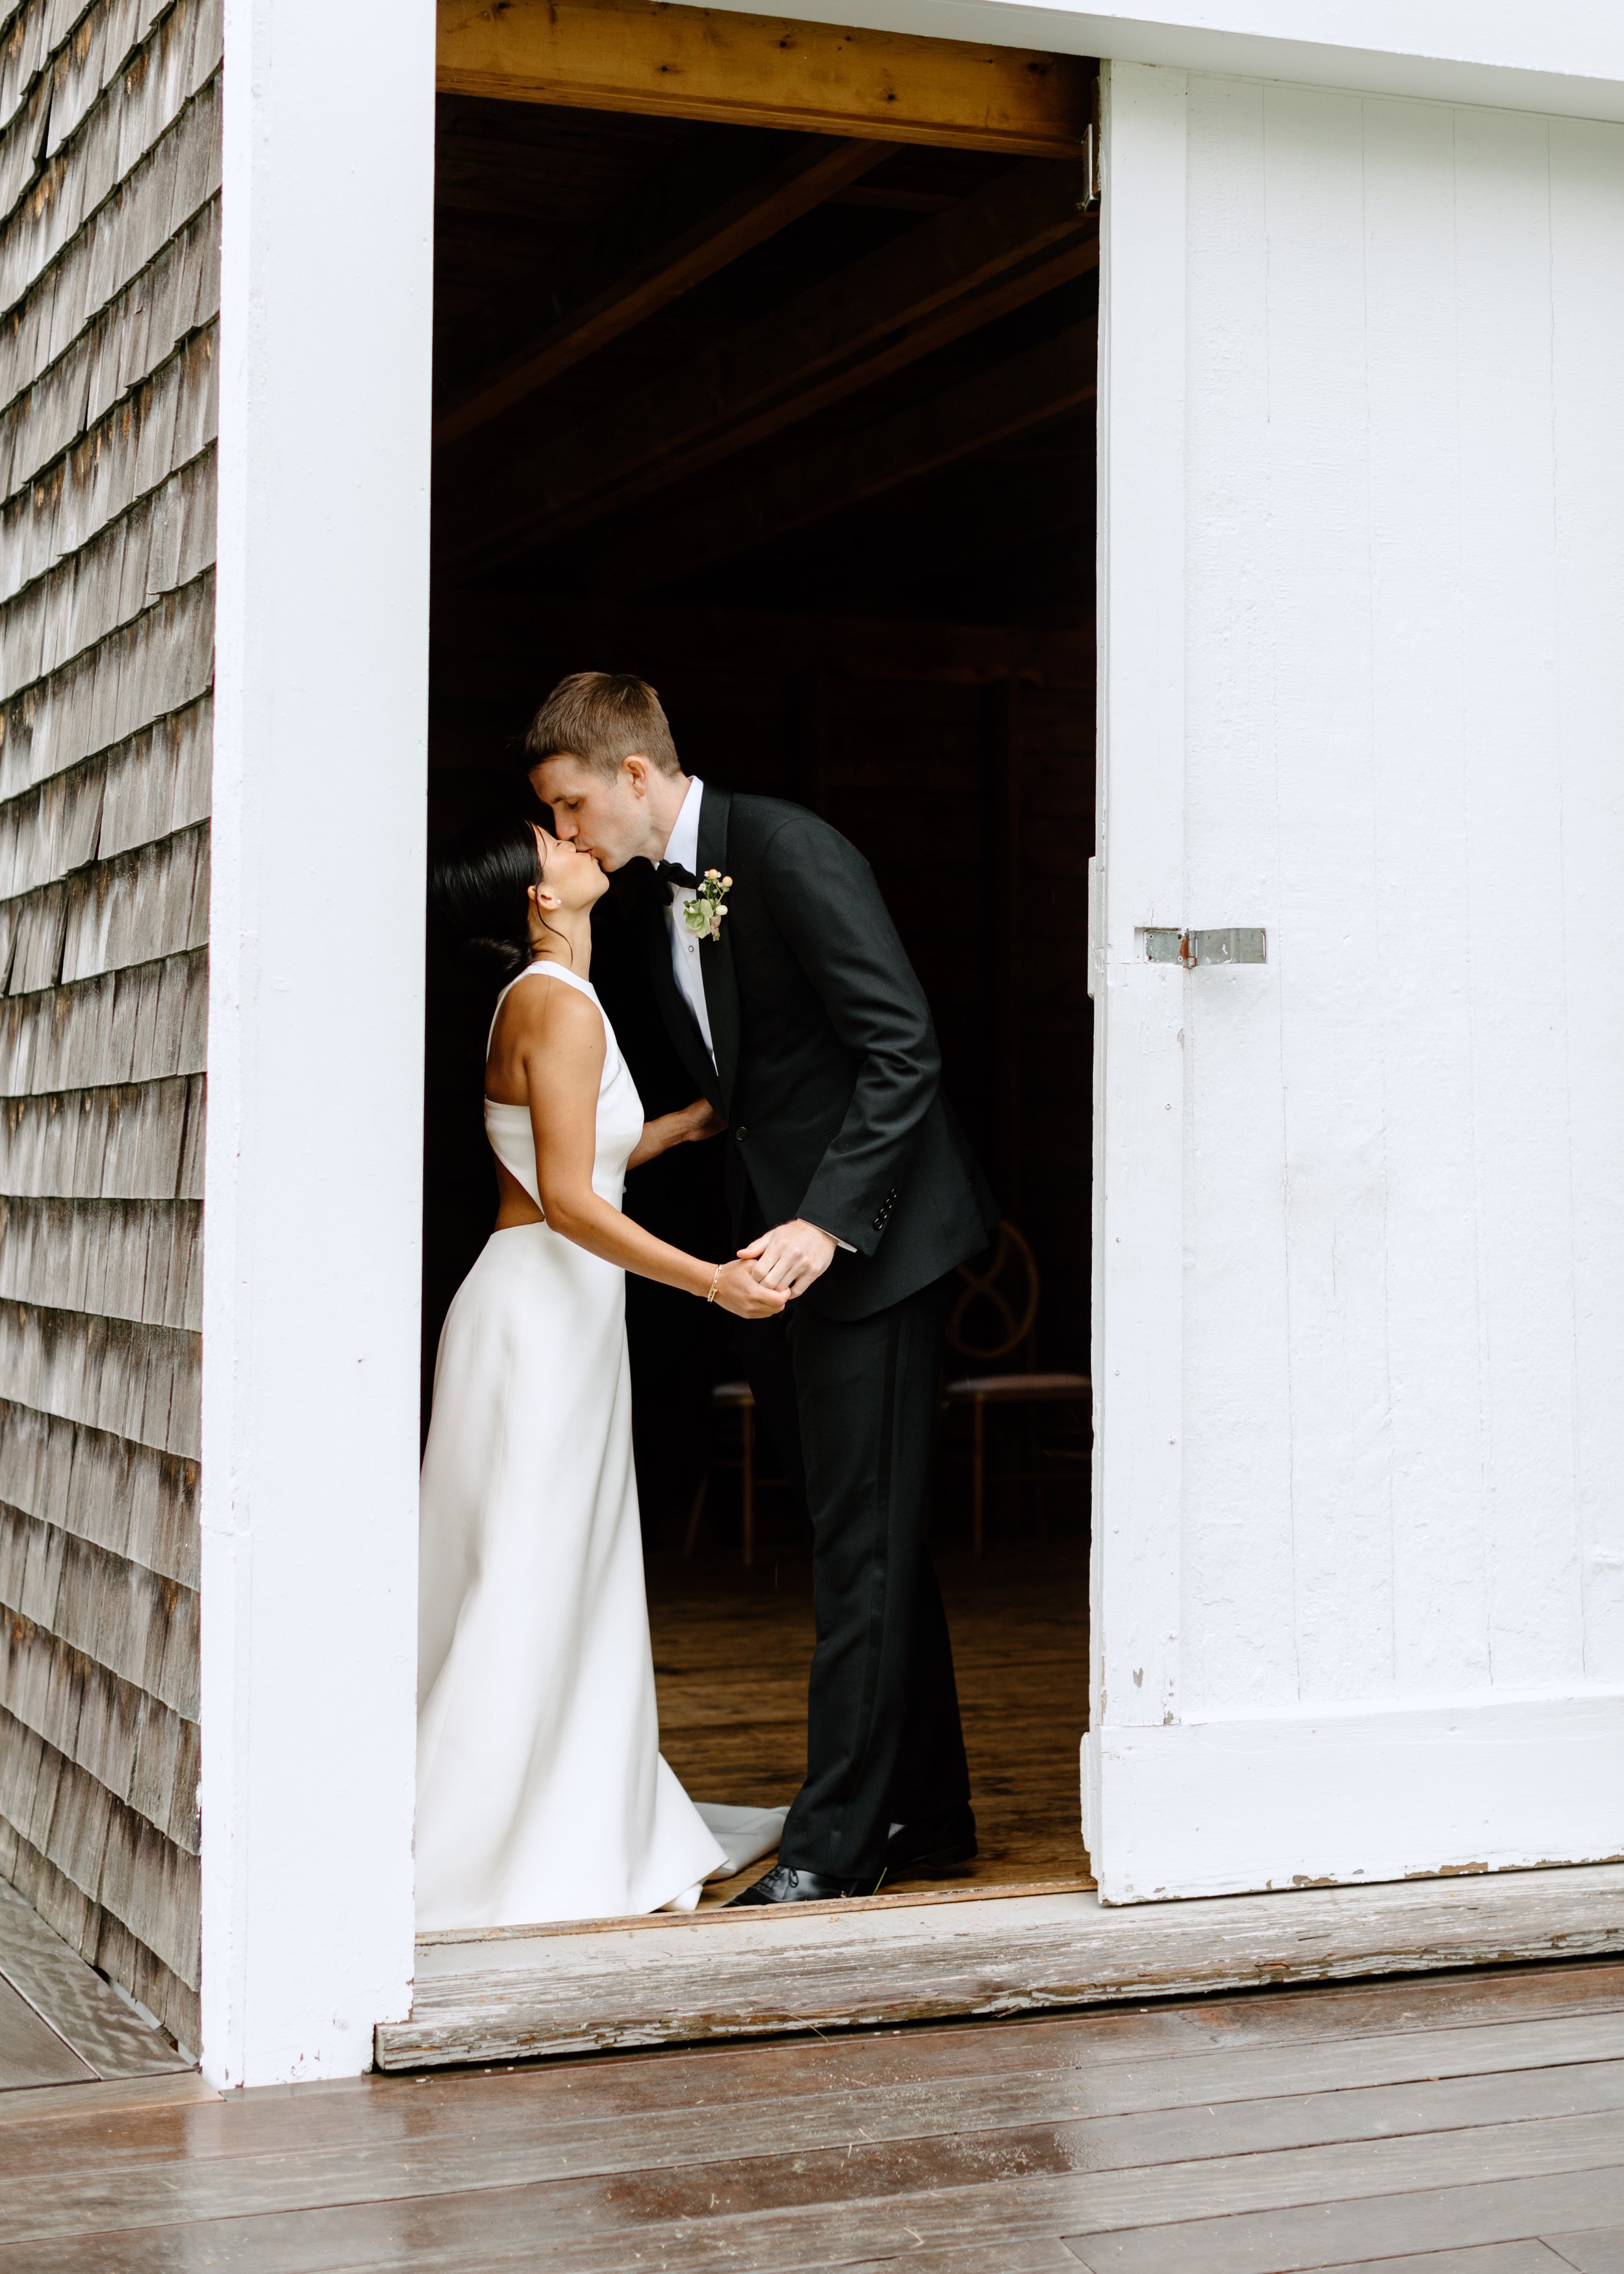 Romantic and Lush Barn Wedding at Cunningham Farm — Pinch Me Planning -  Maine and New England Wedding Planner